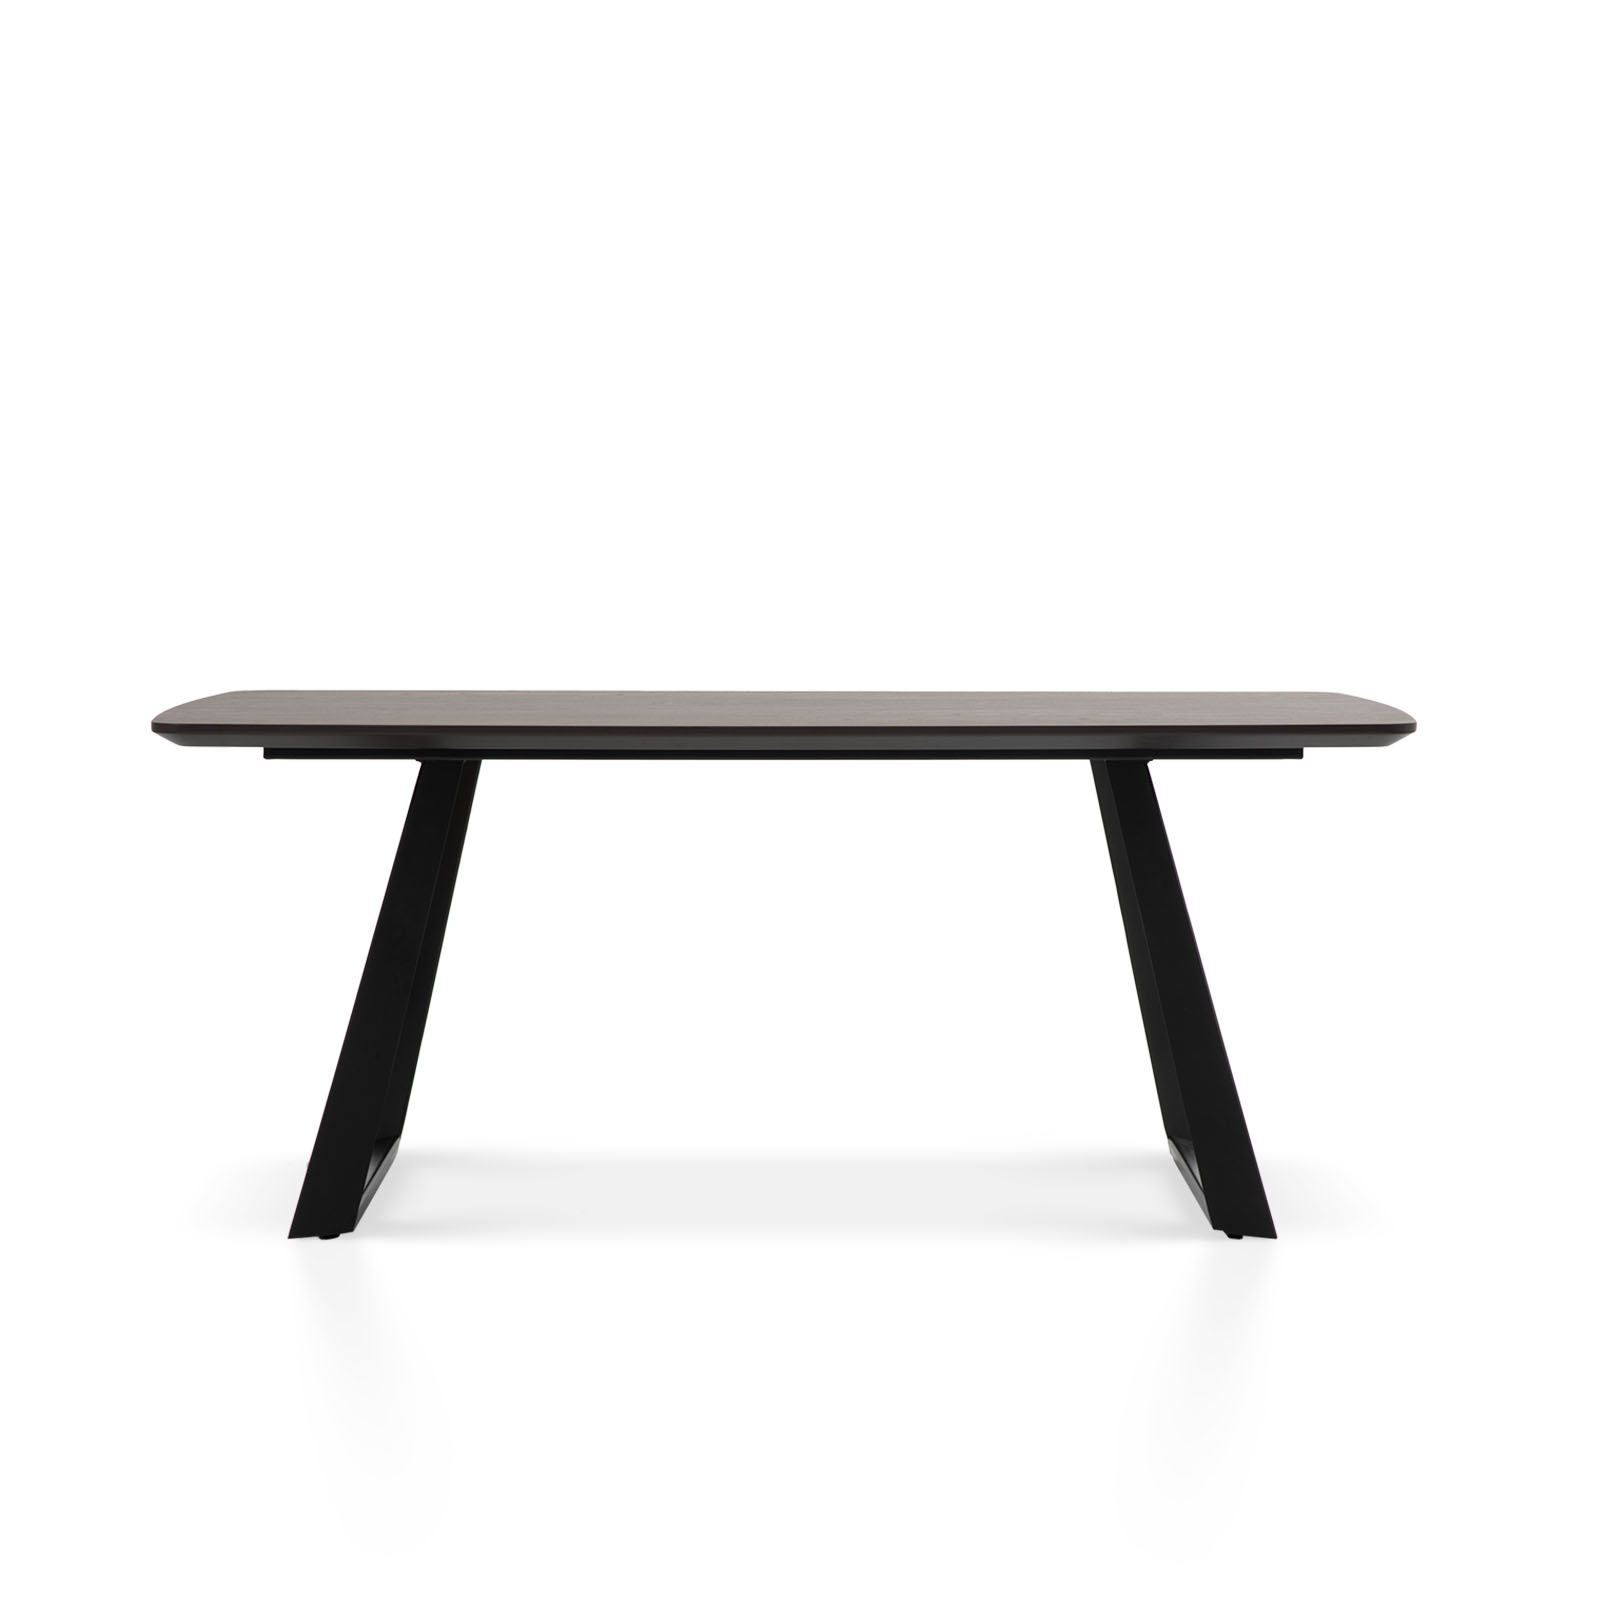 Luis S Dining Table - front view, with black matt metal legs and high-quality engineered wood table top